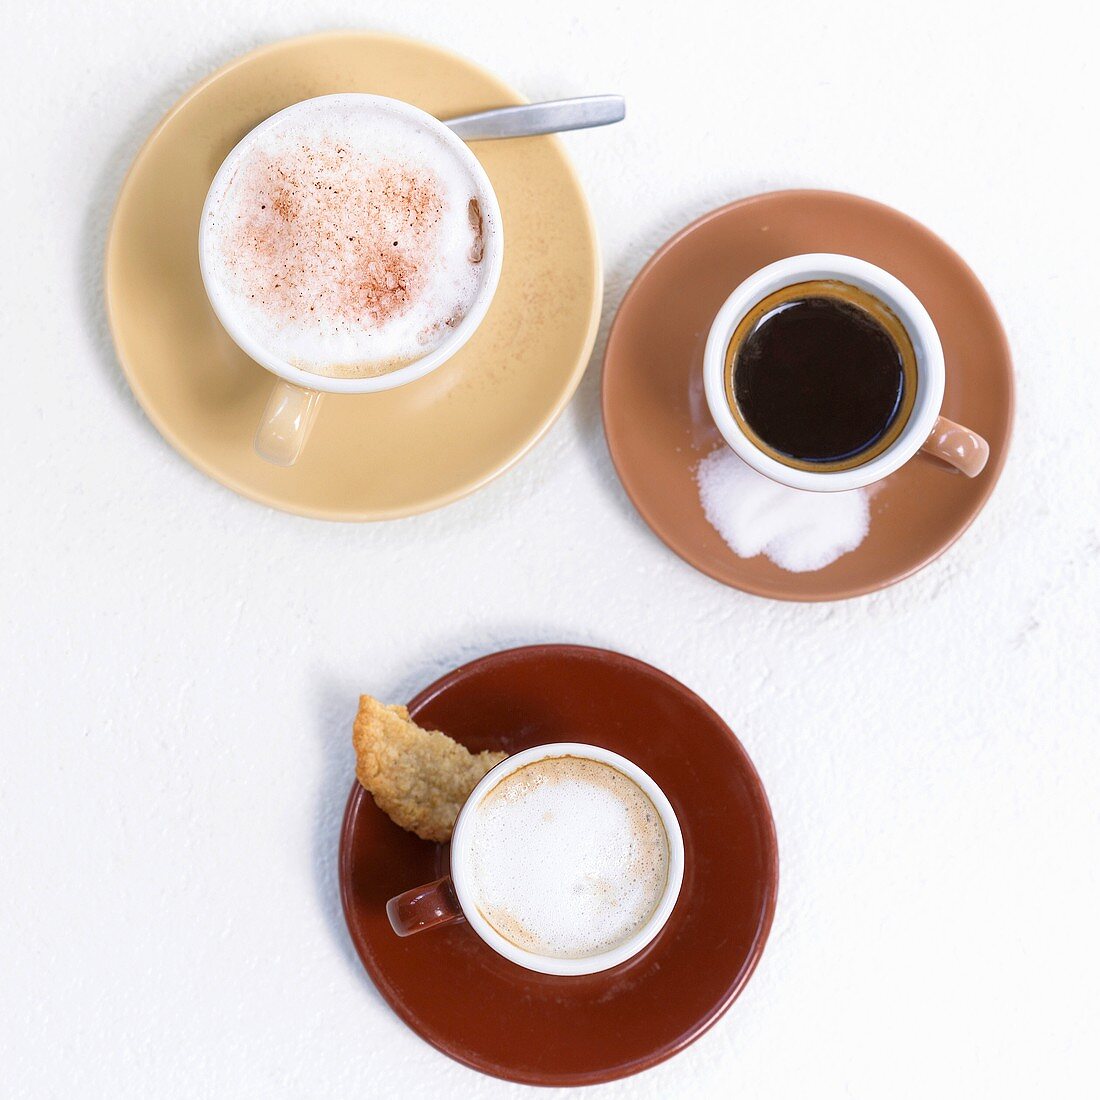 Coffee, cappuccino and espresso, a cup of each